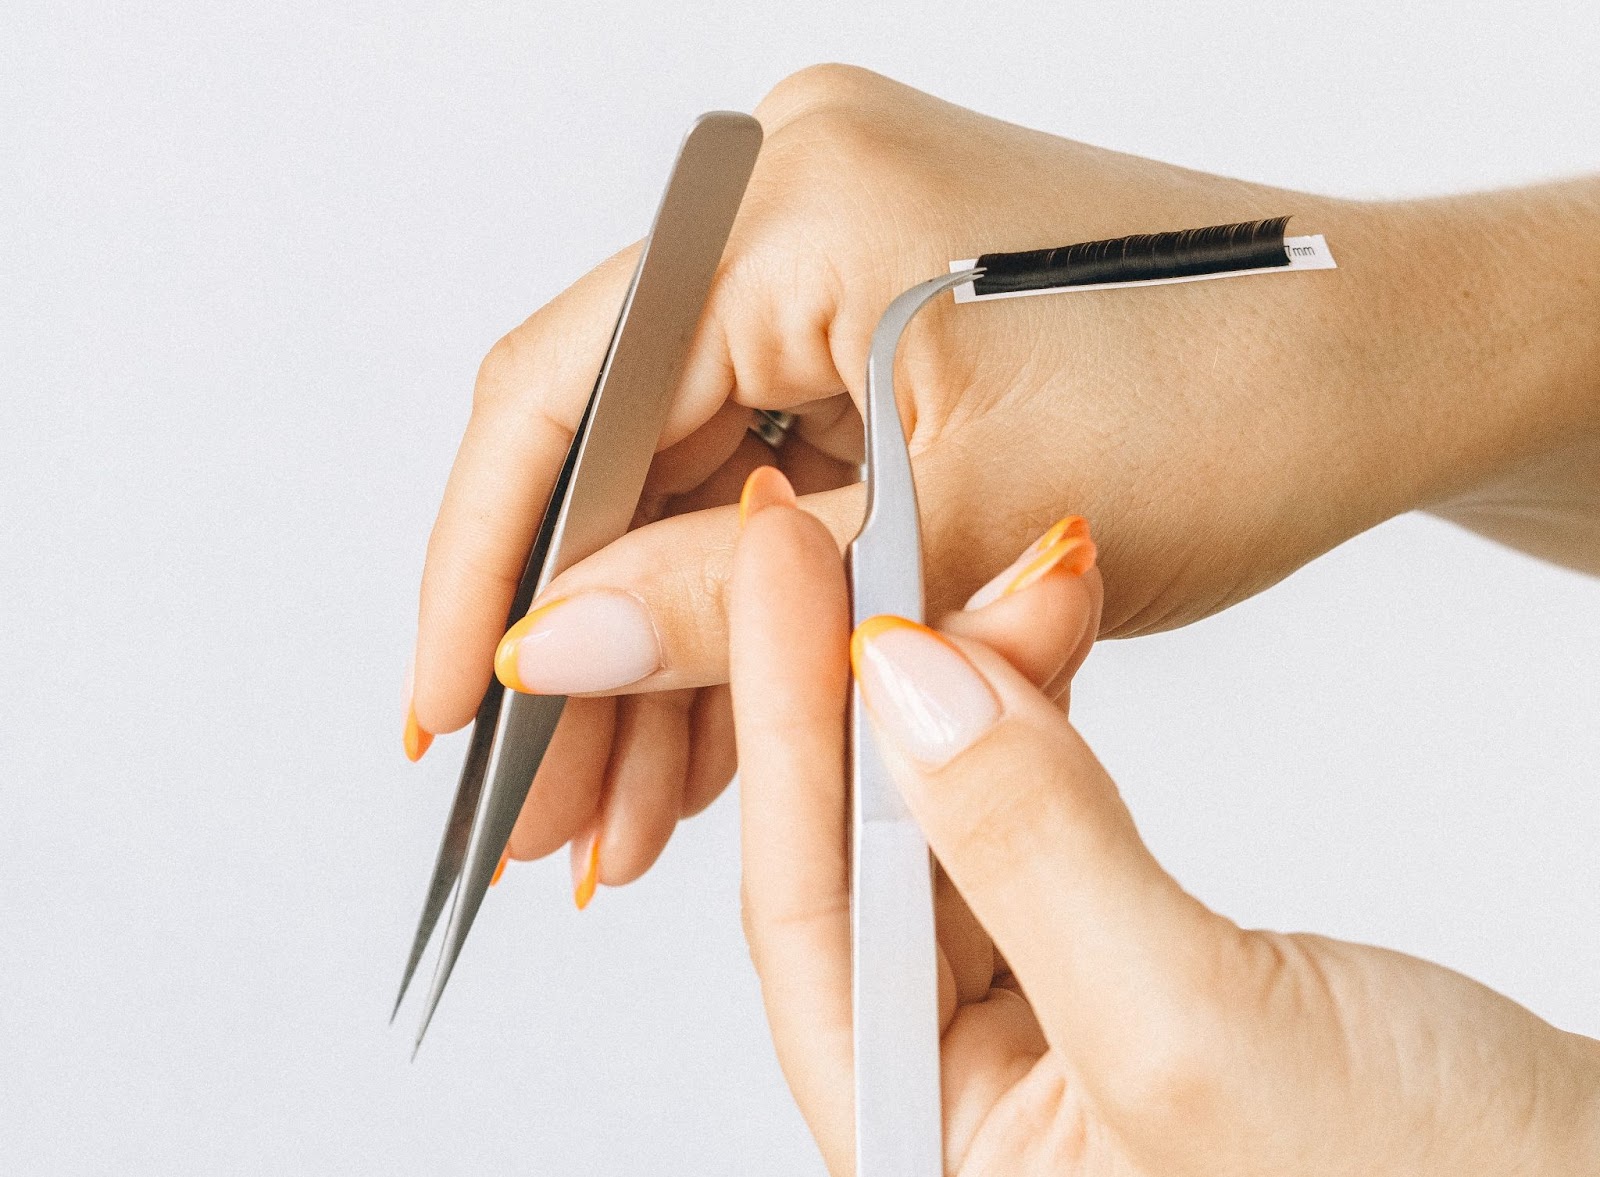 A pair of hands show off tweezers and a strip of eyelashes used for applying eyelash extensions